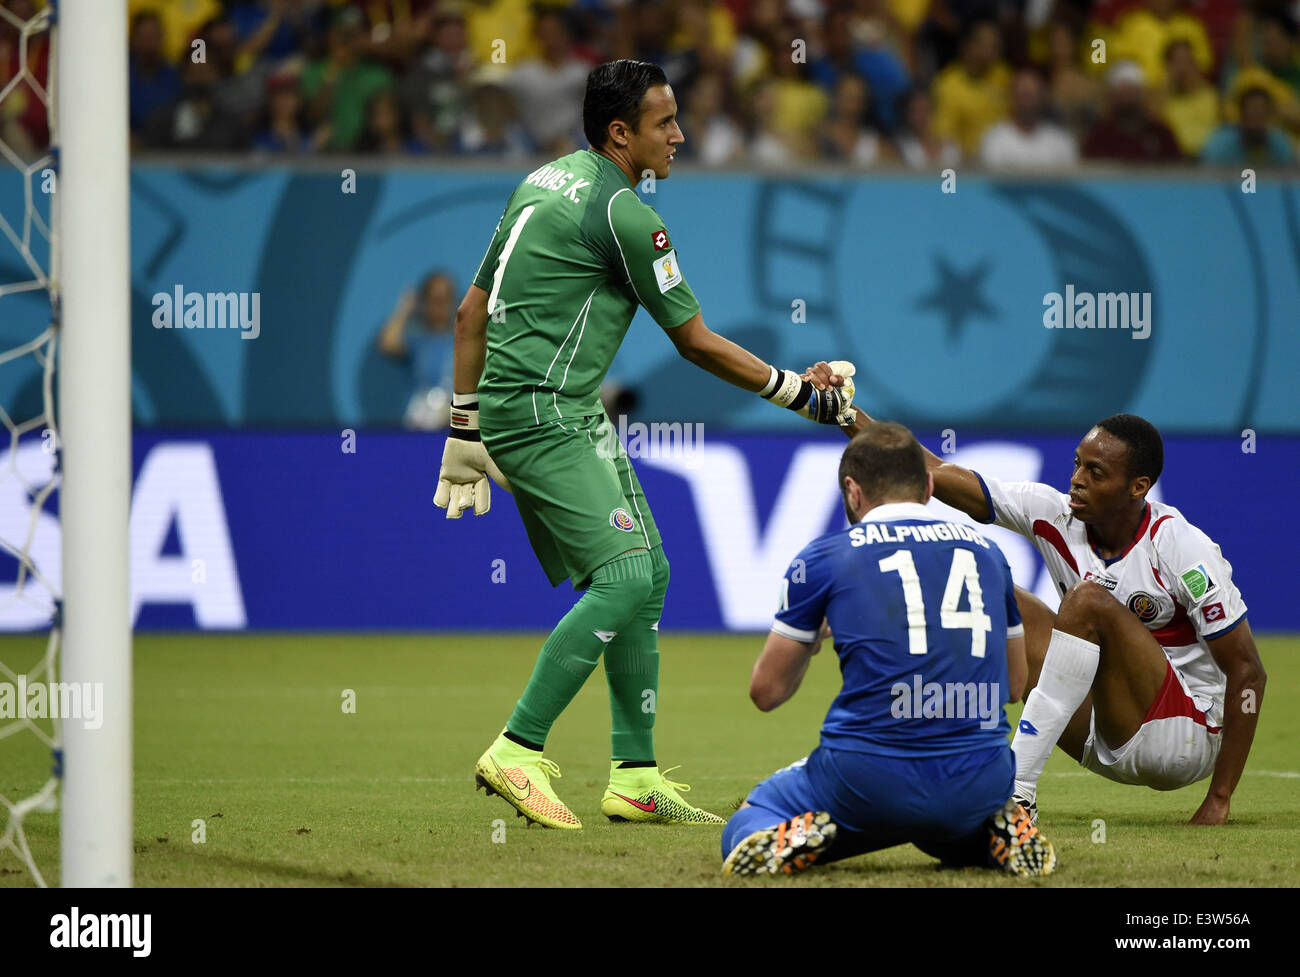 Recife, Brazil. 29th June, 2014. Costa Rica's goalkeeper Keilor Navas (L) pulls up Celso Borges (R) who defends against the attack of Greece's Dimitris Salpingidis (C) during a Round of 16 match between Costa Rica and Greece of 2014 FIFA World Cup at the Arena Pernambuco Stadium in Recife, Brazil, on June 29, 2014. Credit:  Lui Siu Wai/Xinhua/Alamy Live News Stock Photo